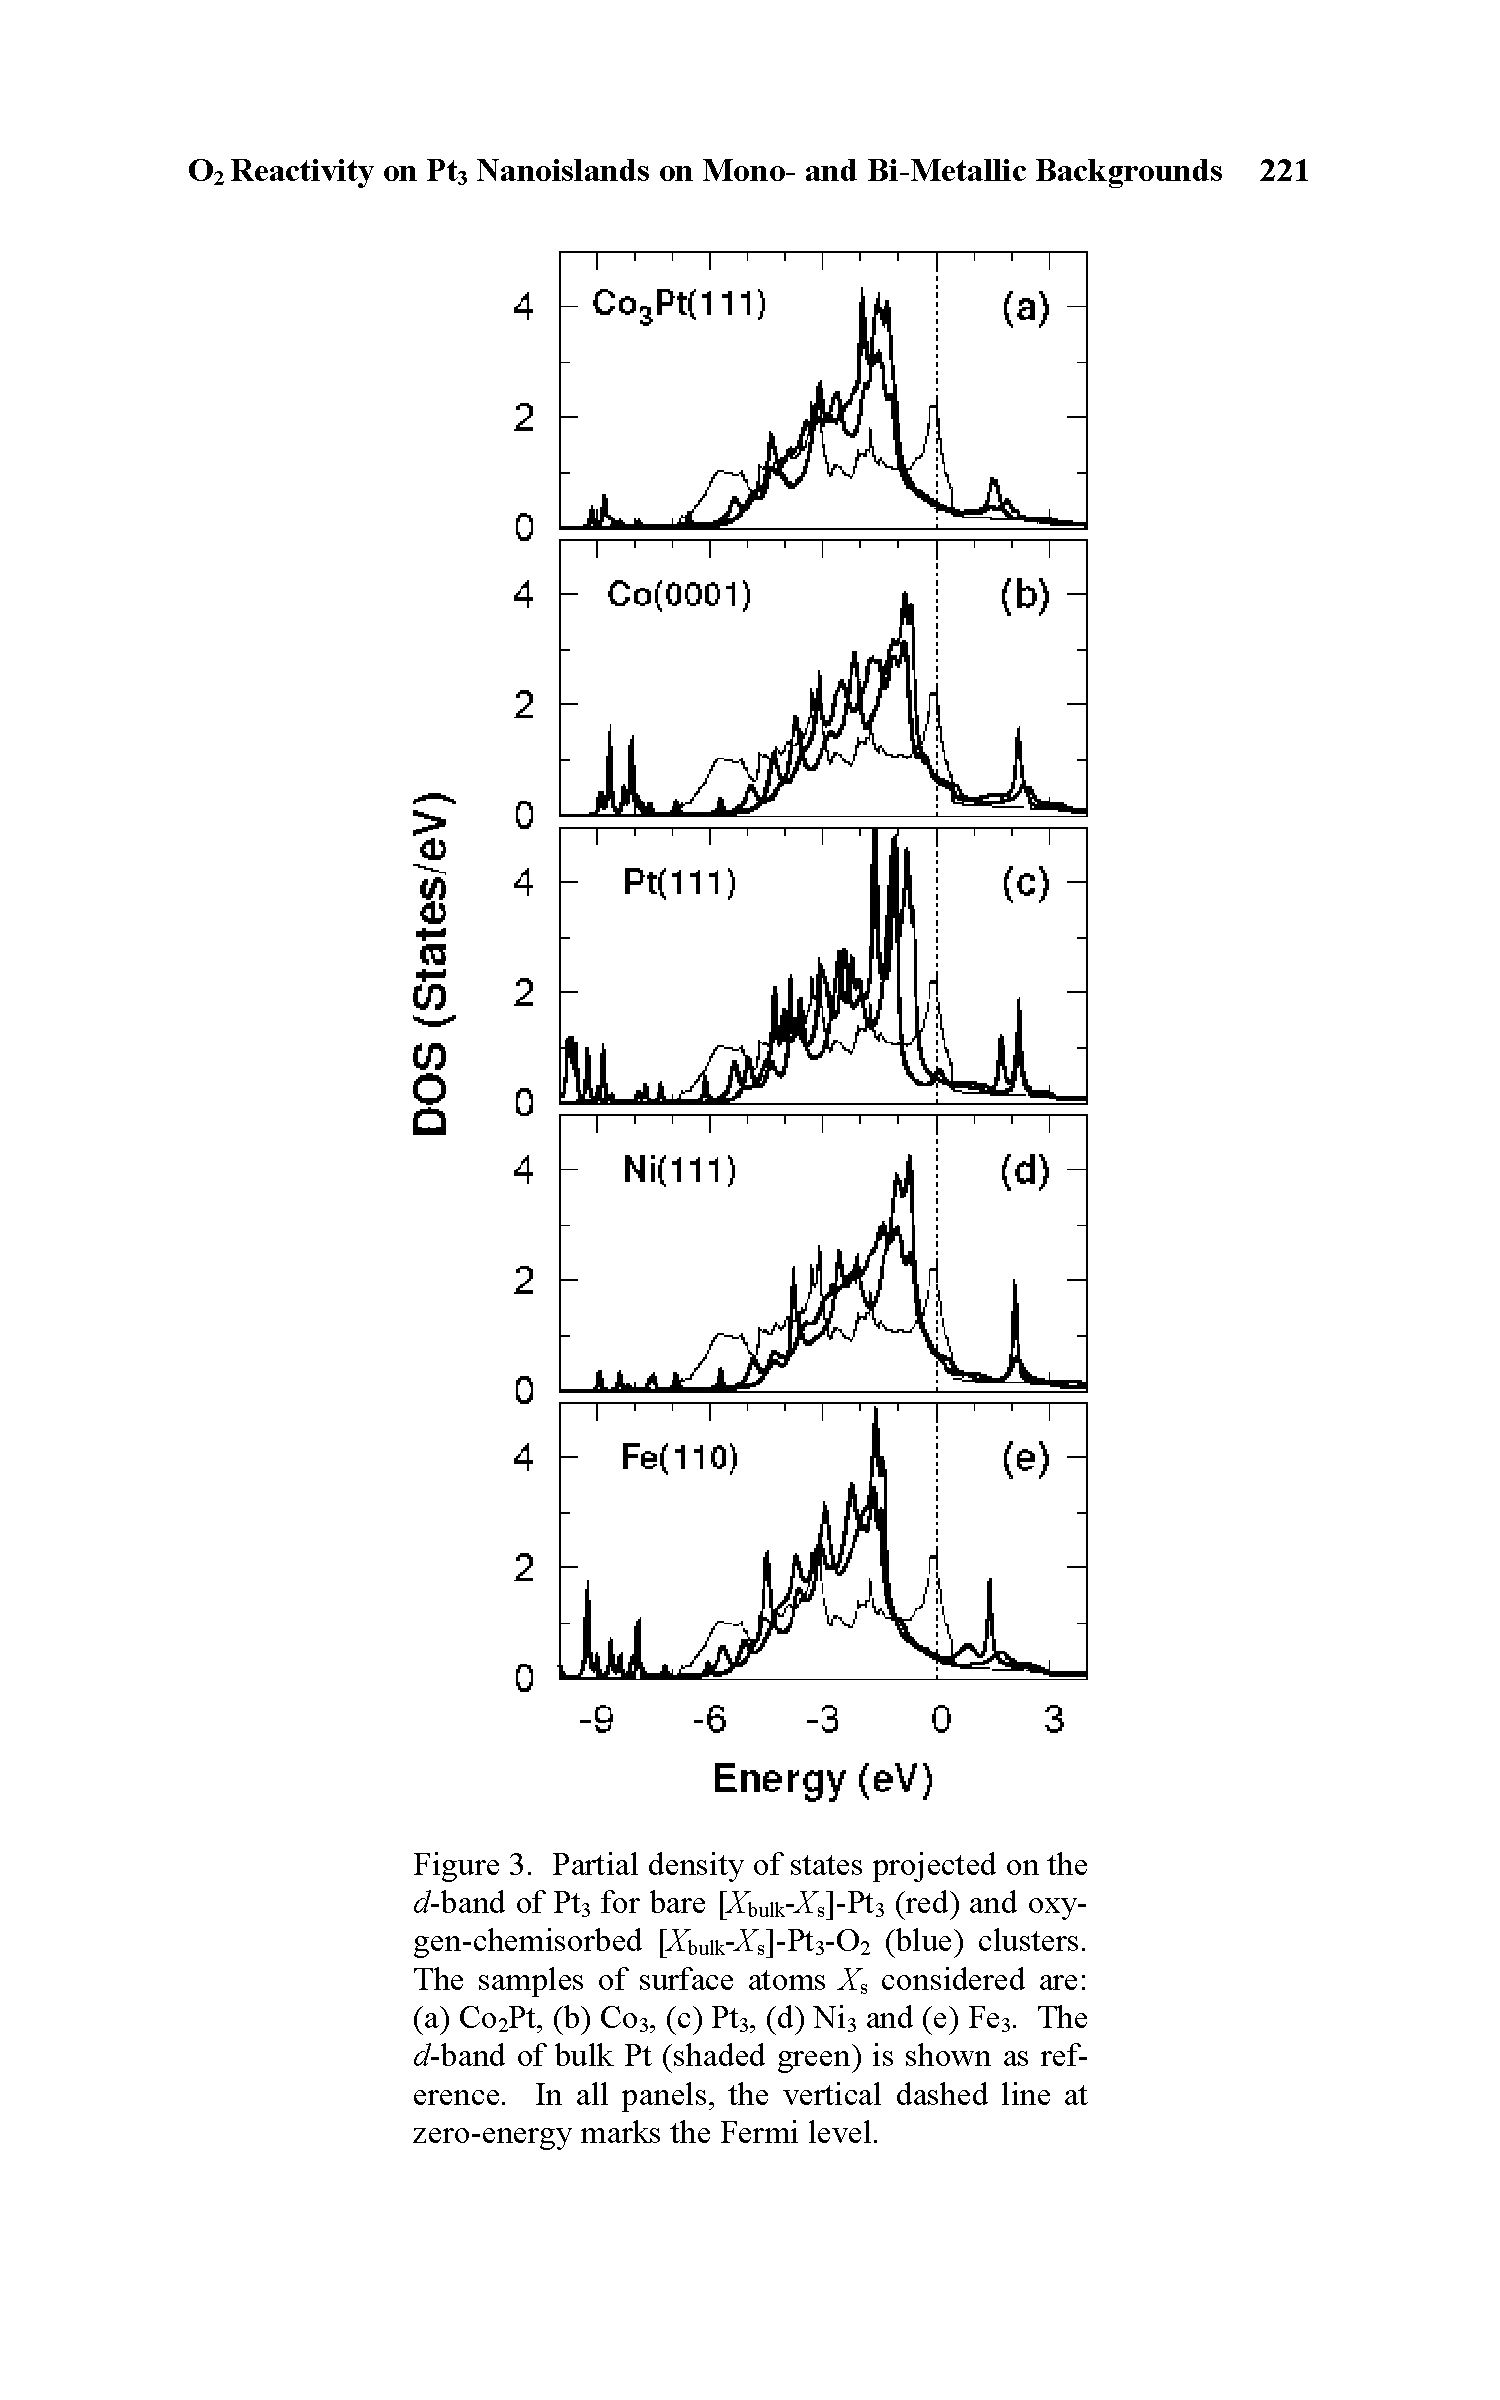 Figure 3. Partial density of states projected on the d-hond of Pts for bare [Xbuik- sJ-Pts (red) and oxygen-chemisorbed [Xbuik- s]-Pt3-02 (blue) clusters. The samples of surface atoms Xs considered are (a) Co2Pt, (b) C03, (c) Pt3, (d) Ni3 and (e) Fe3. The d-hond of bulk Pt (shaded green) is shown as reference. In all panels, the vertical dashed line at zero-energy marks the Fermi level.